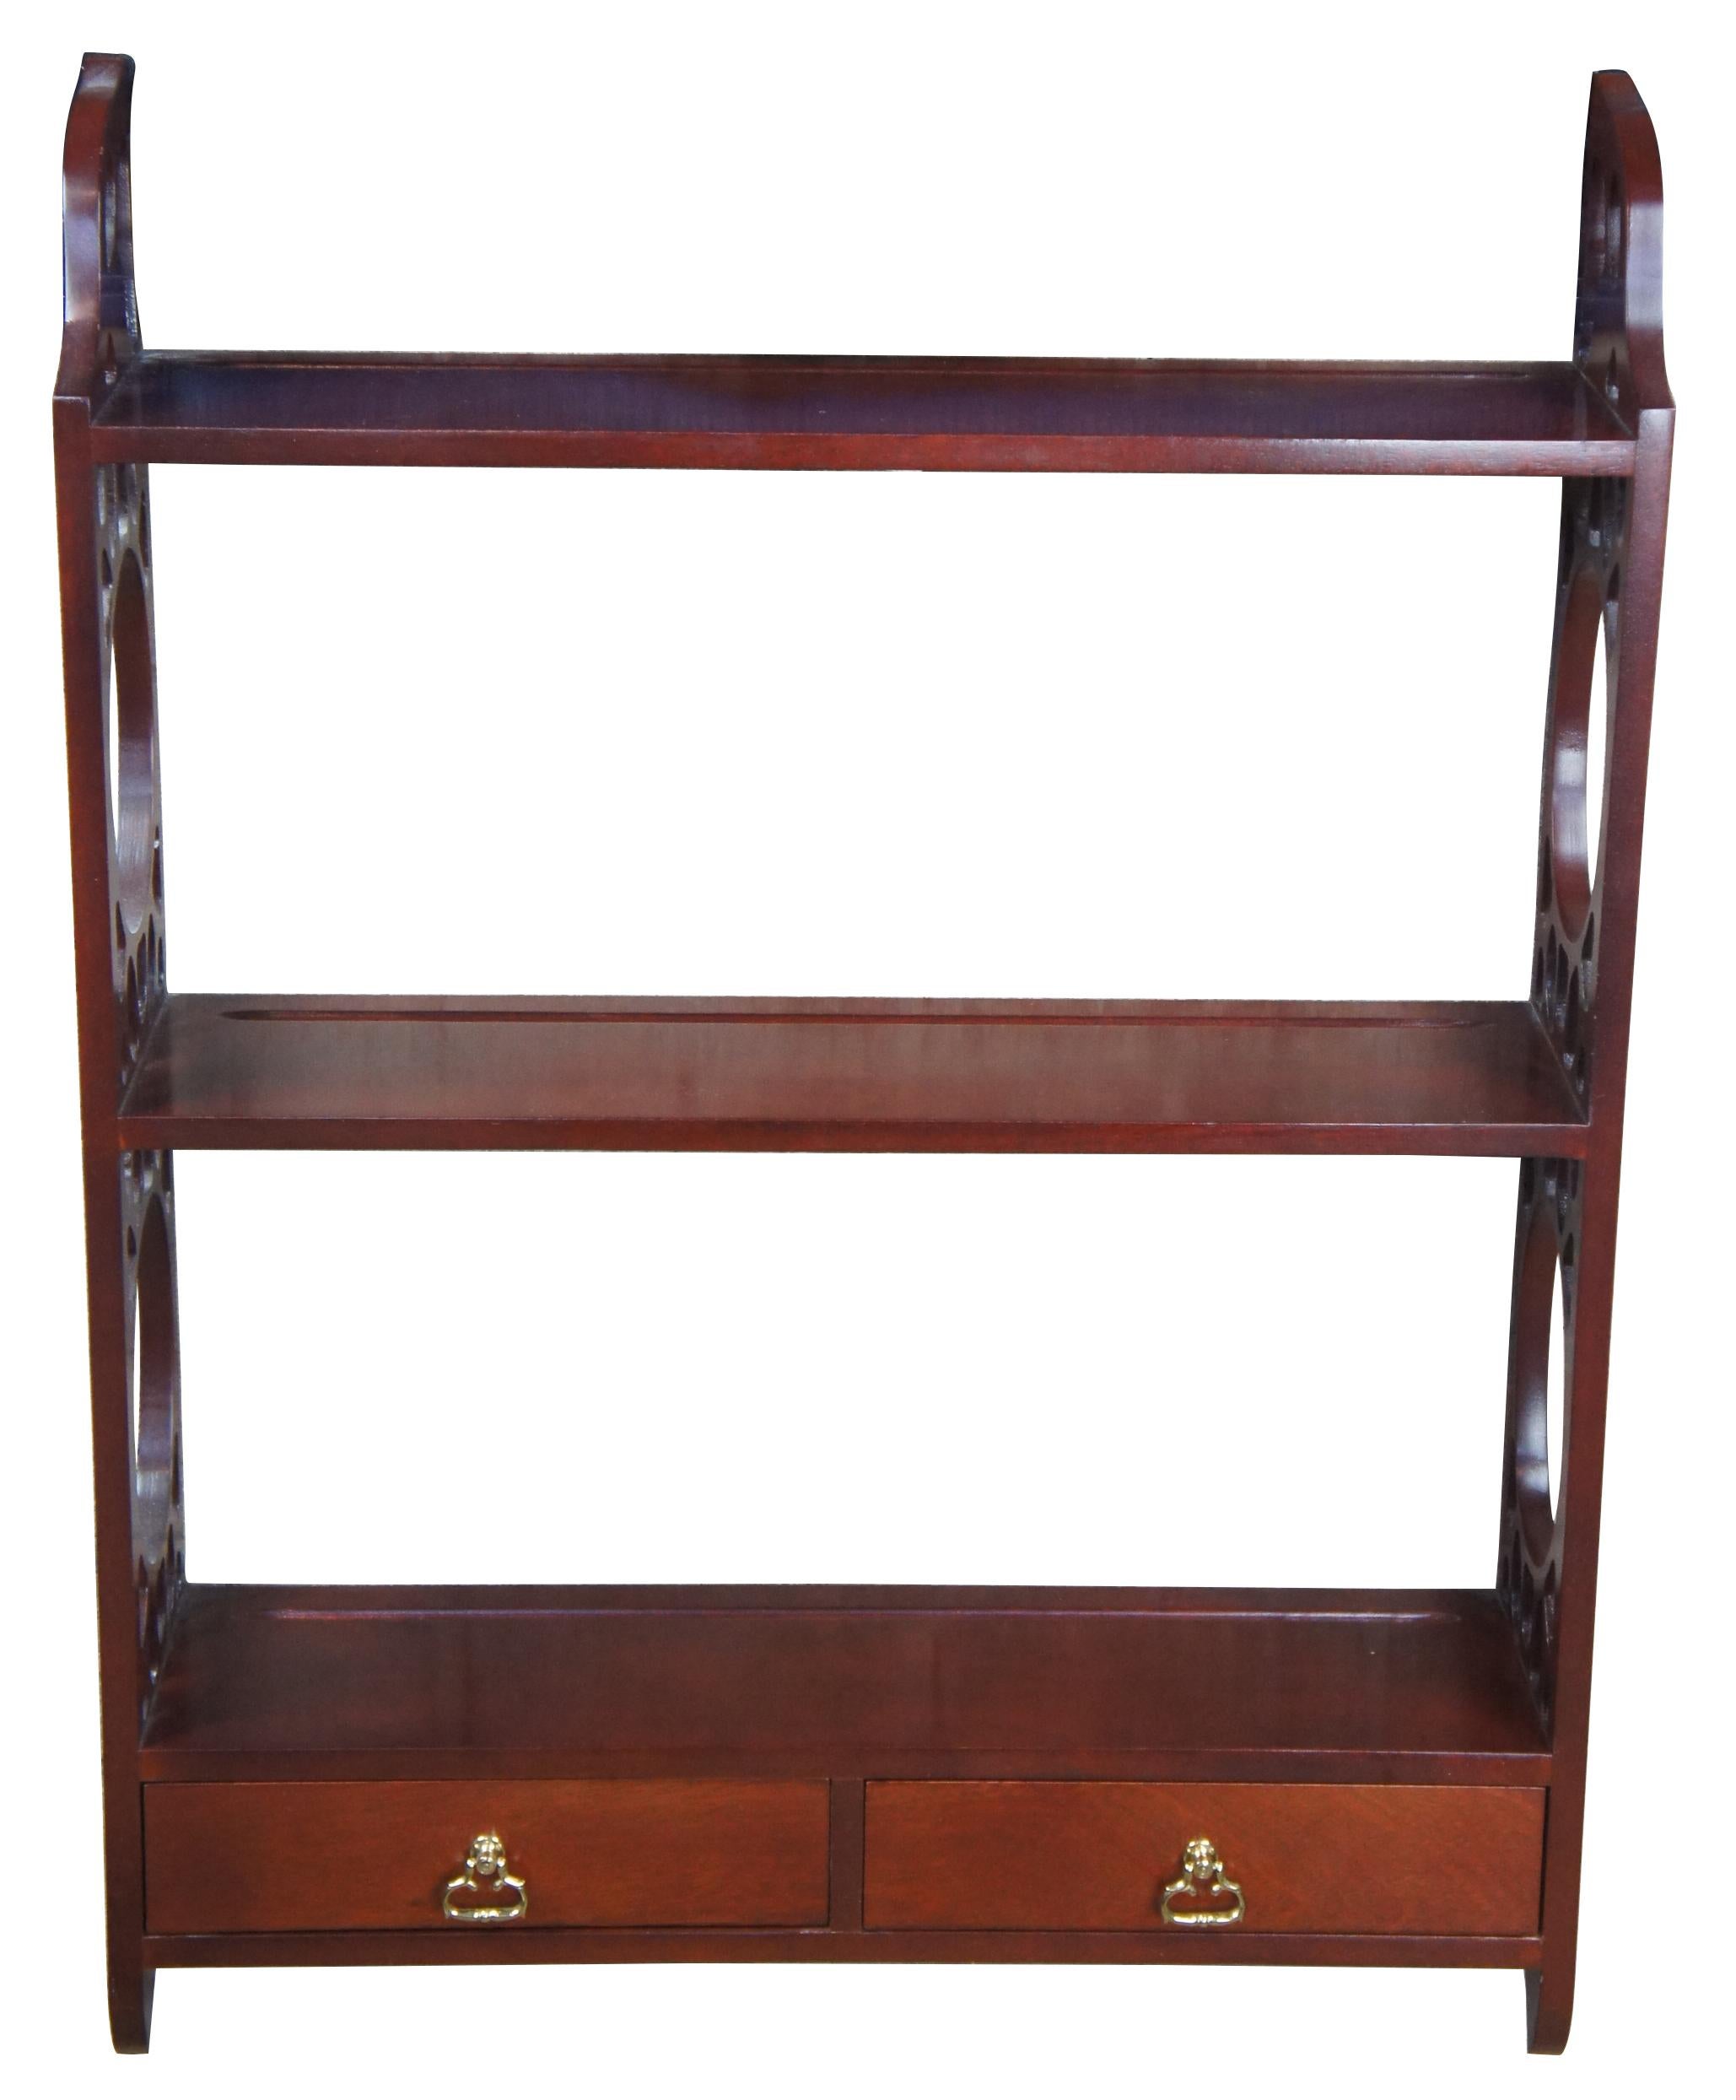 Chippendale style cherry wall shelf or plate rack. Featuring three shelves connected by twin fret work supports. Includes two drawers at the base. Attributed to Henkel Harris. Measures: 35